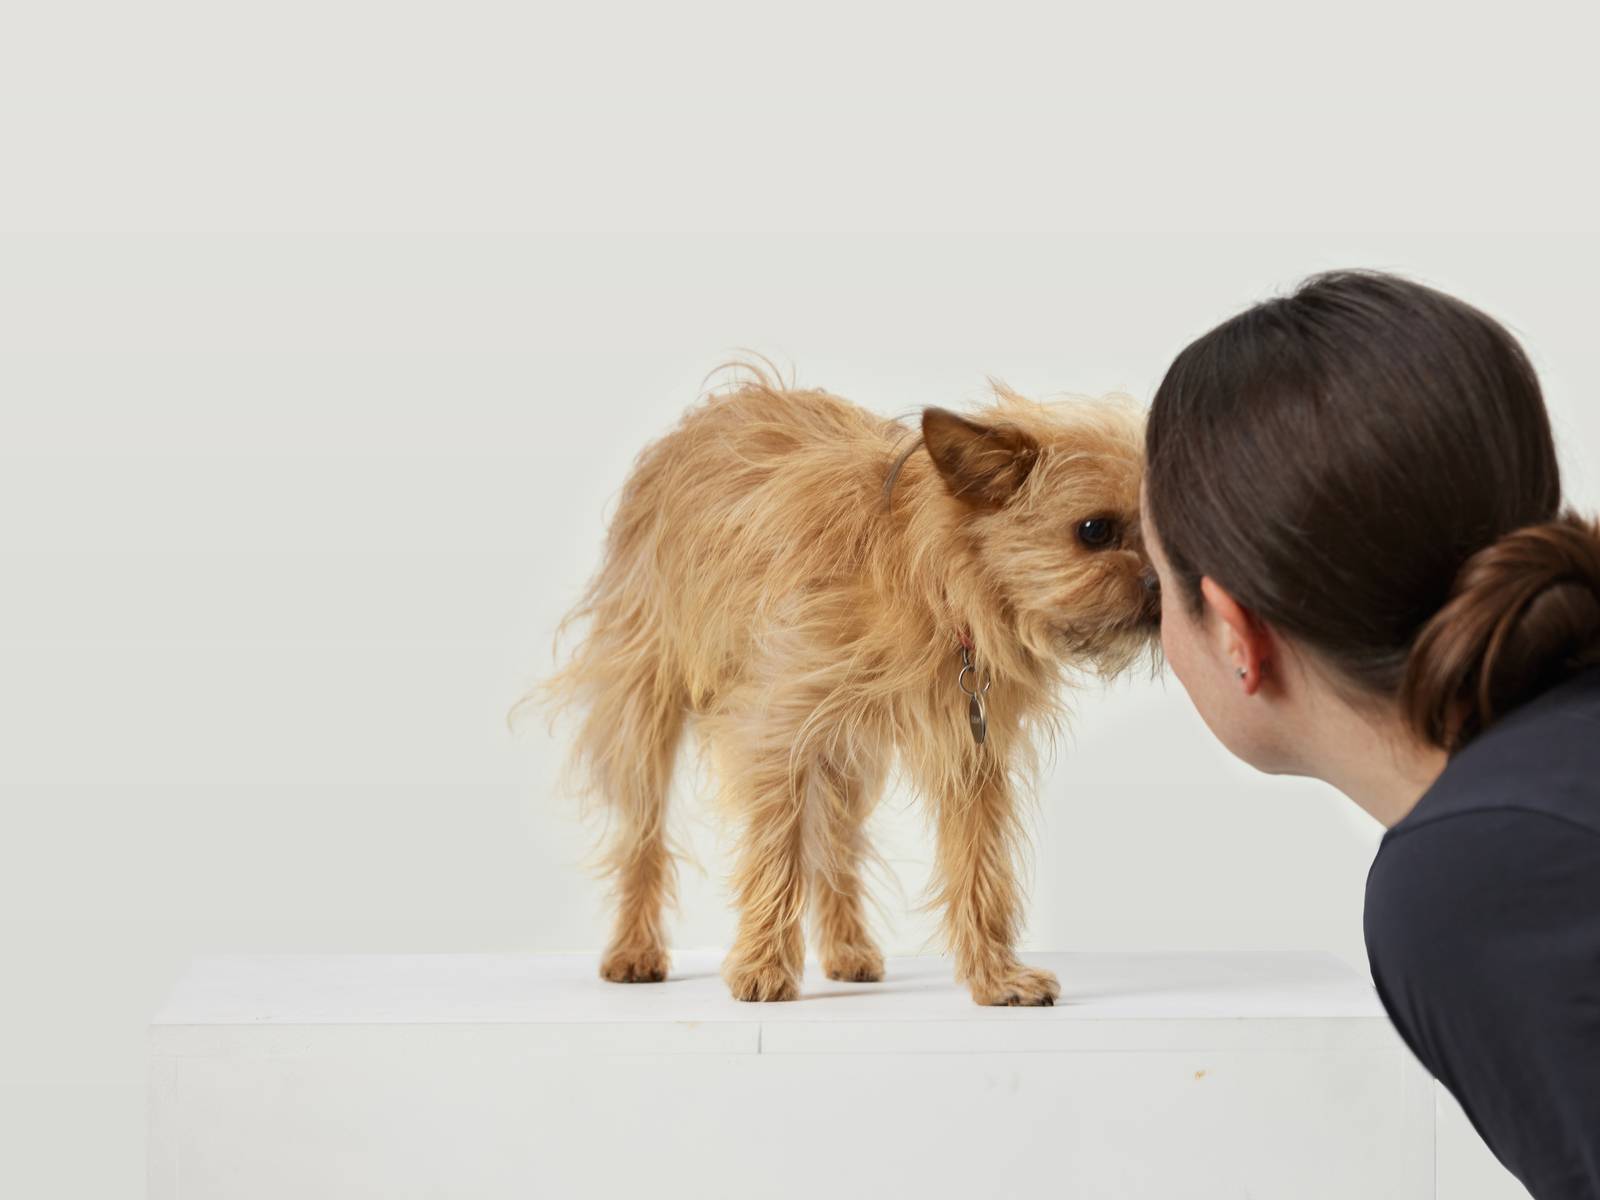 Chewy, a small golden haired dog, touching noses with her owner.